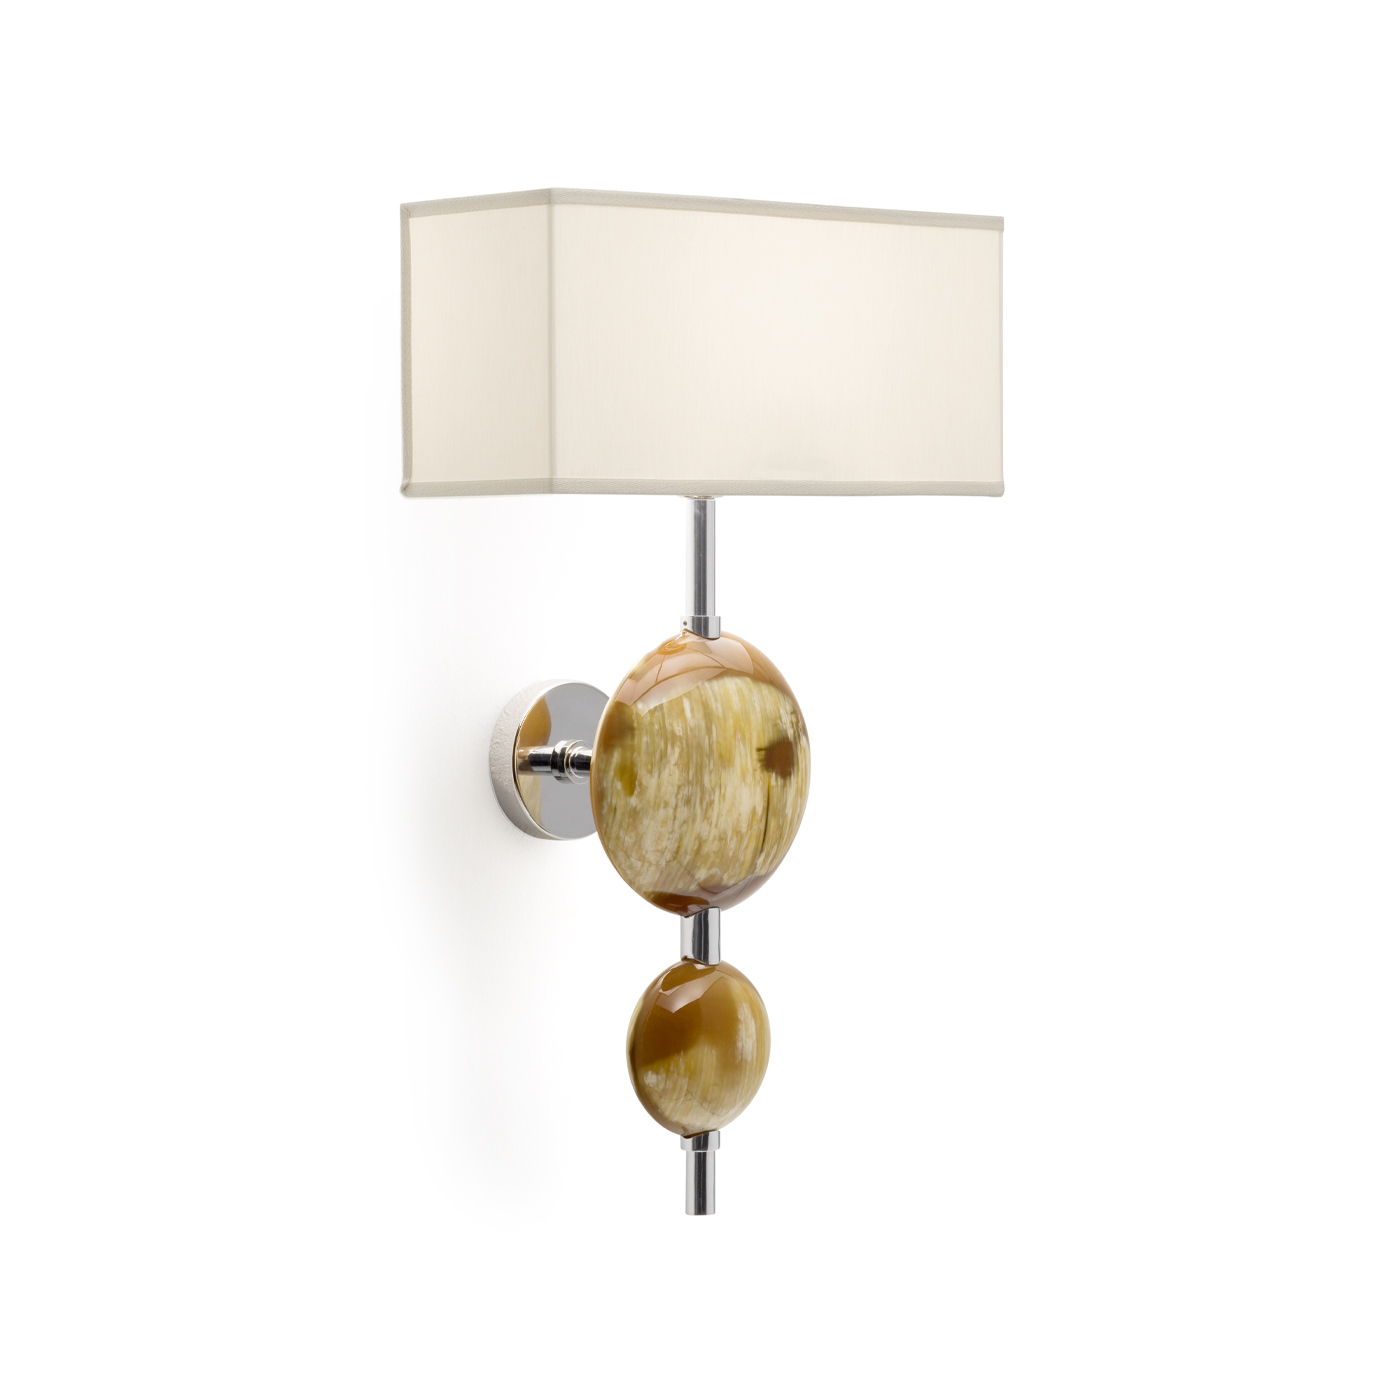 Lamps - Vittoria wall sconce in horn and stainless steel - Arcahorn